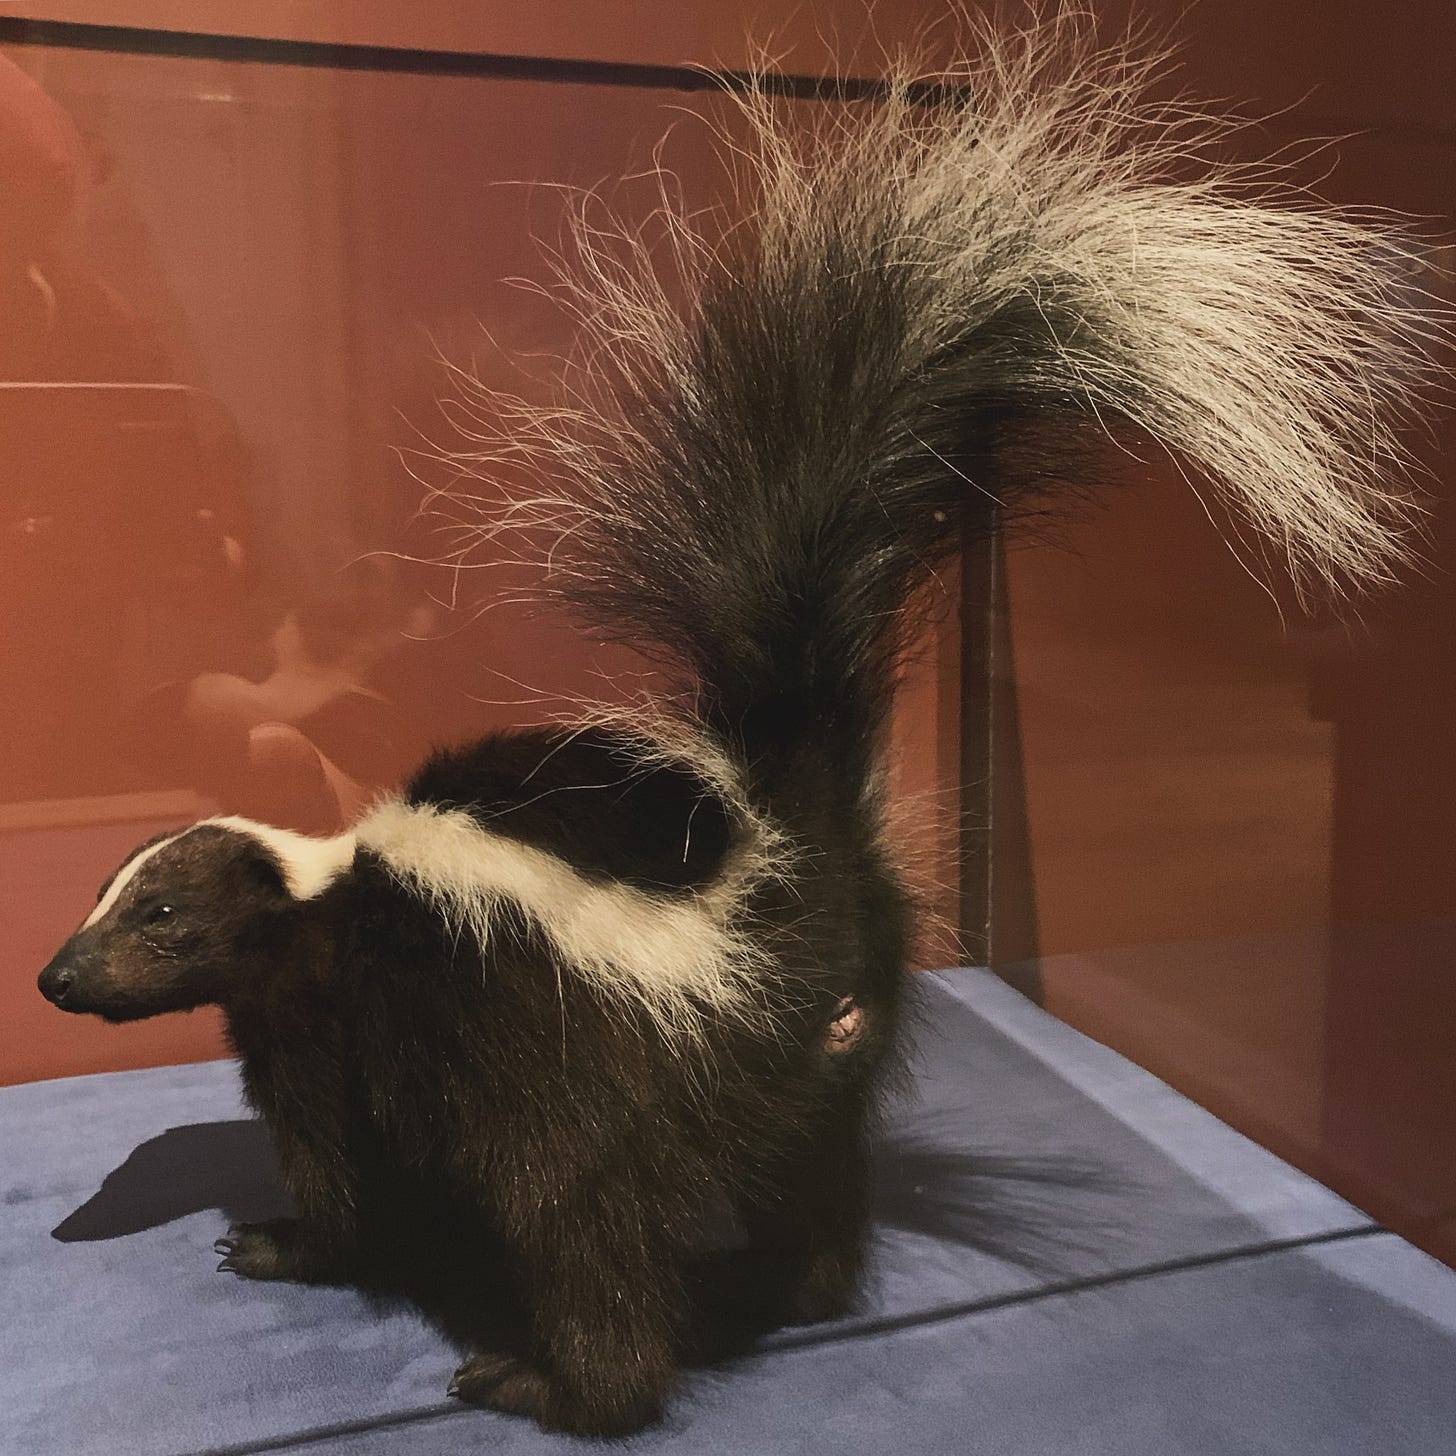 Taxidermied skunk, butthole first